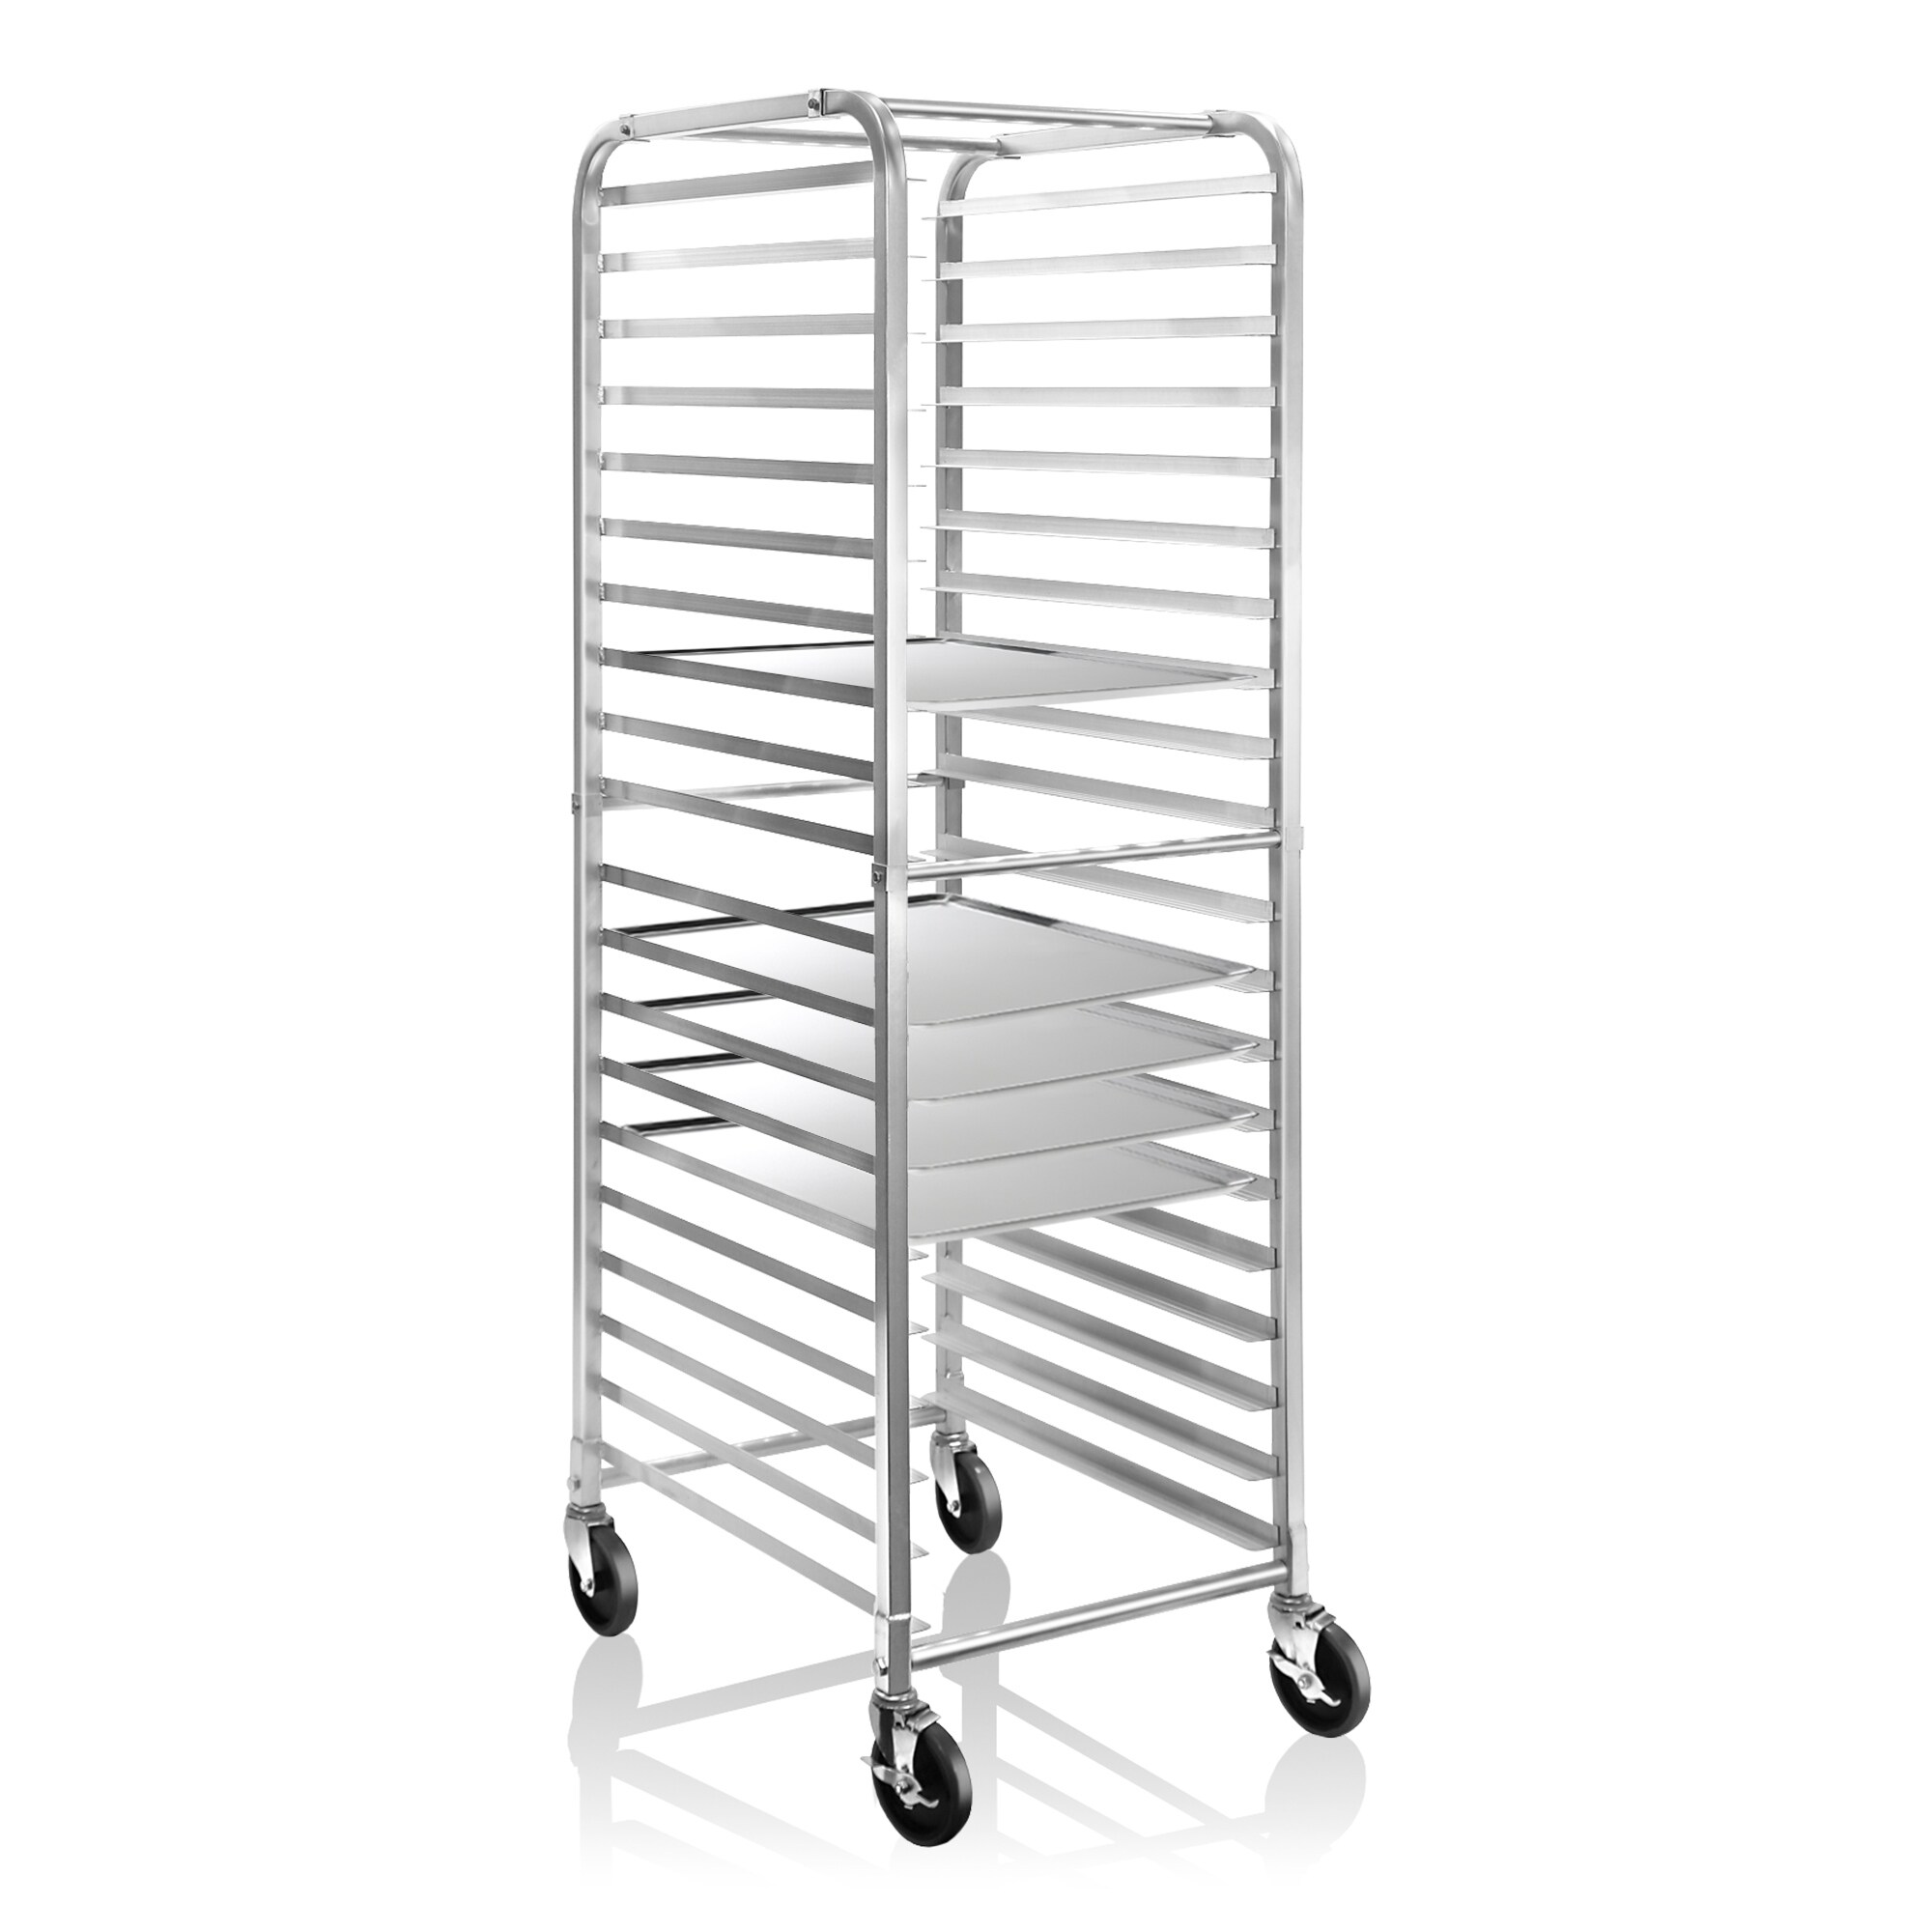 https://ak1.ostkcdn.com/images/products/is/images/direct/cc6674f03f8f5c7c162c01cc914996036f88e5e3/20-Sheet-Commercial-Kitchen-Bakery-Rack-by-GRIDMANN.jpg